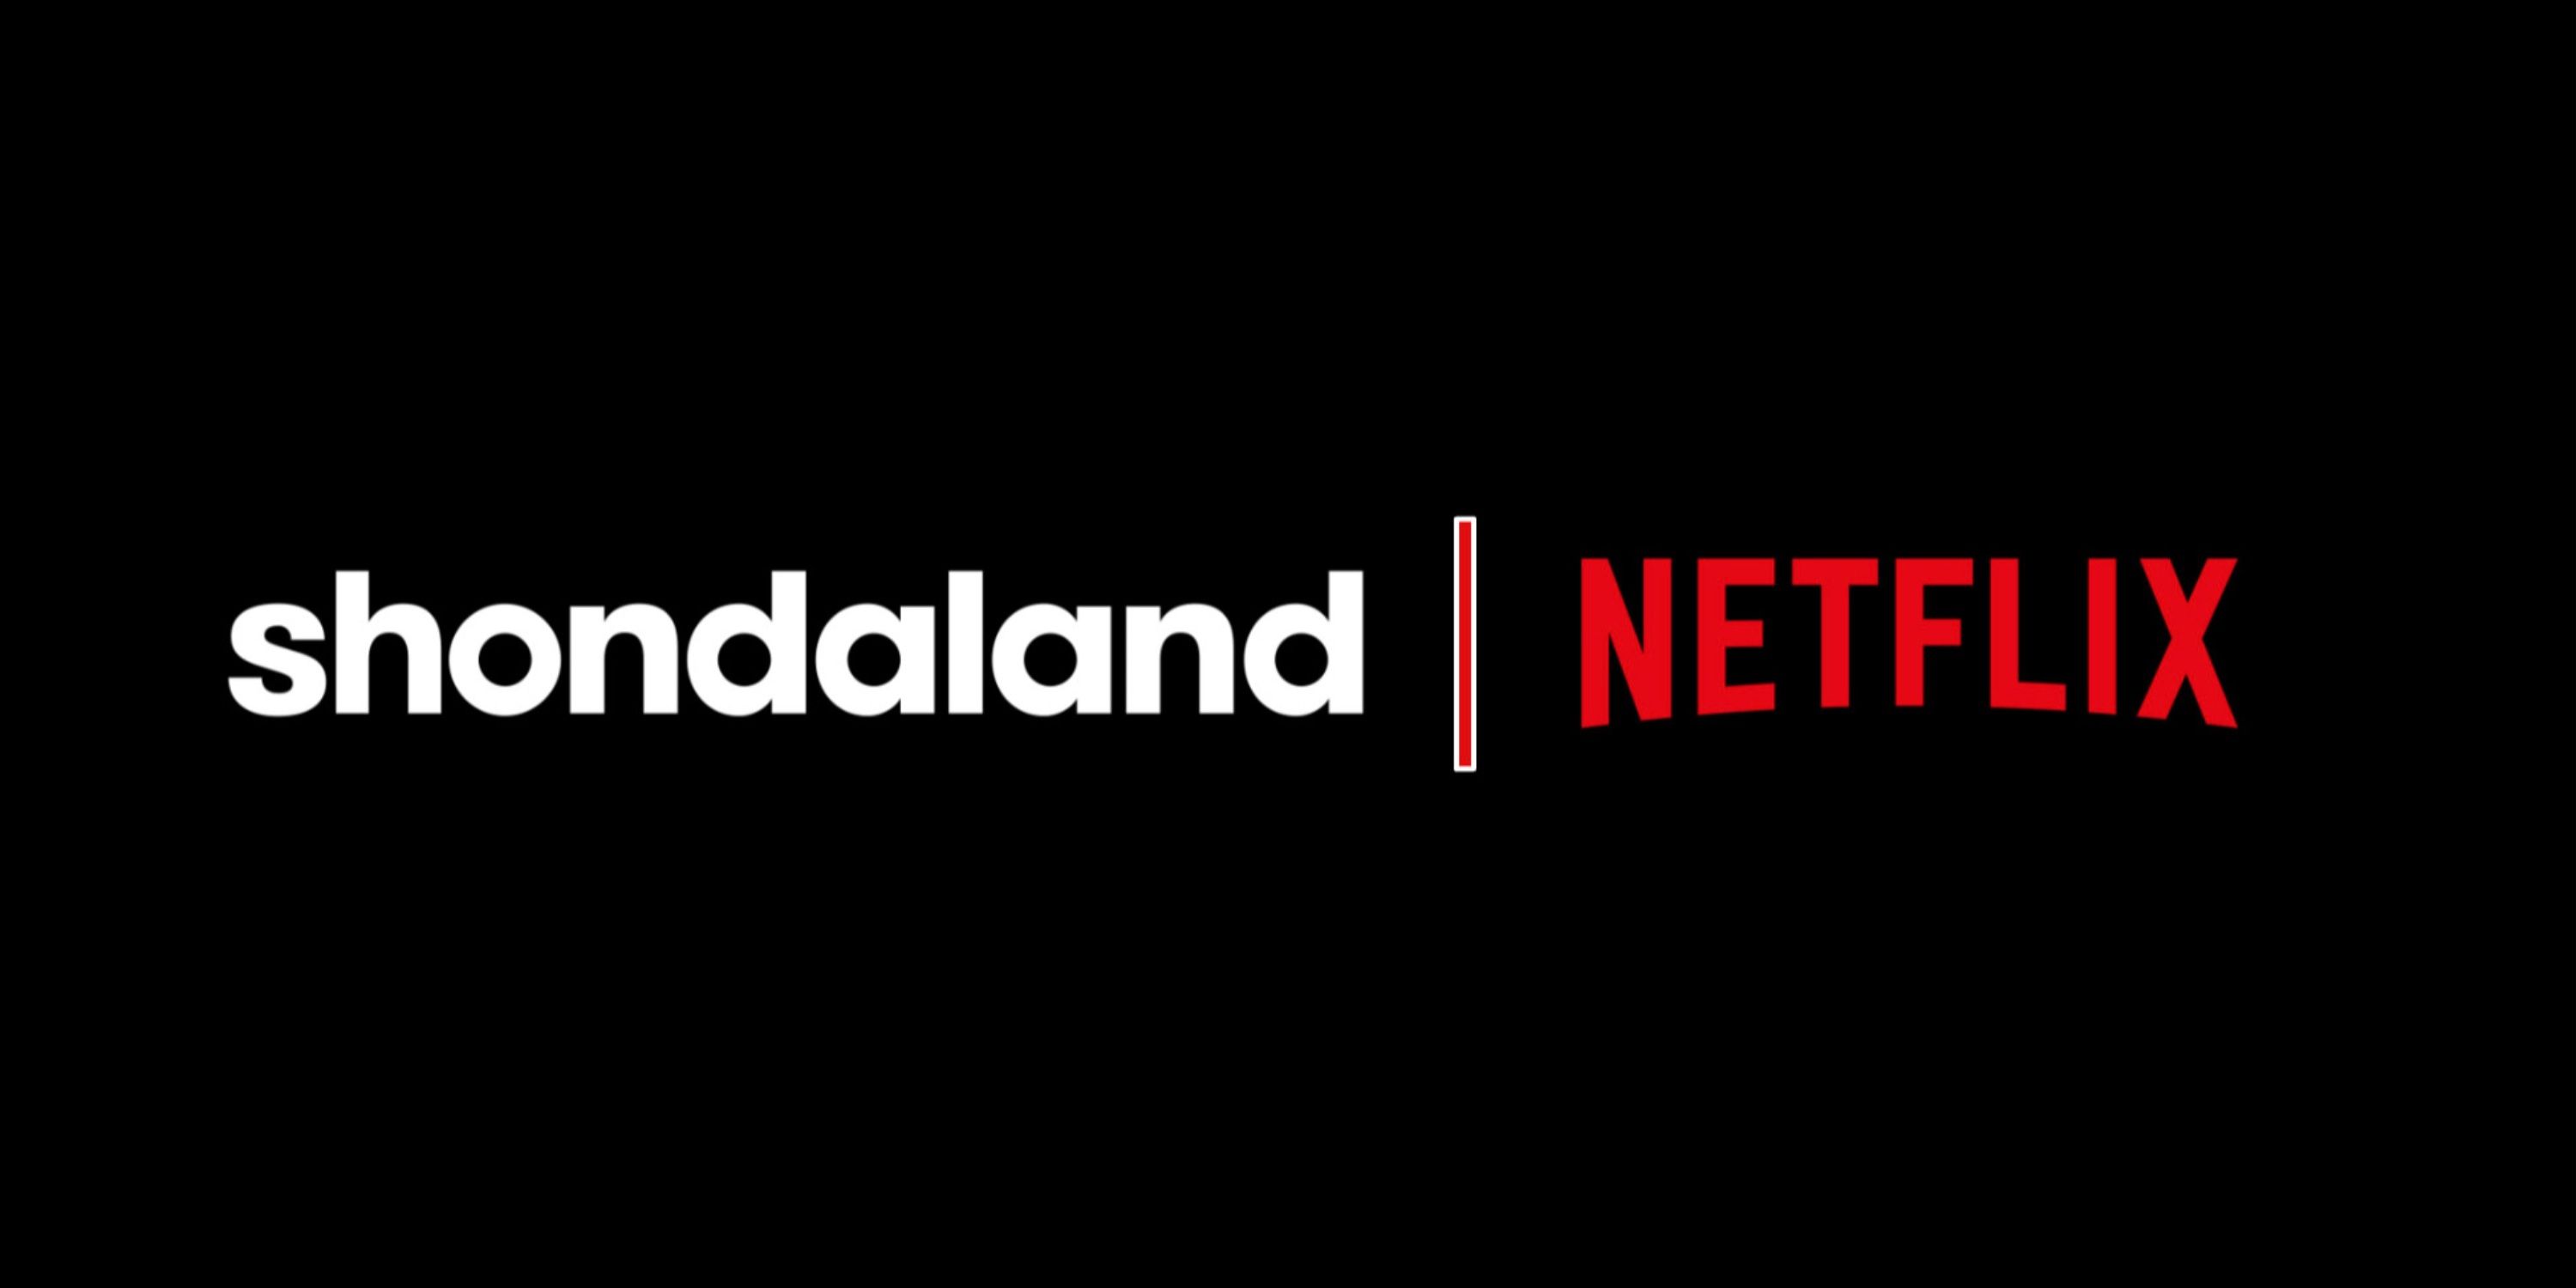 Everything We Know About Shondalands Upcoming Netflix Series